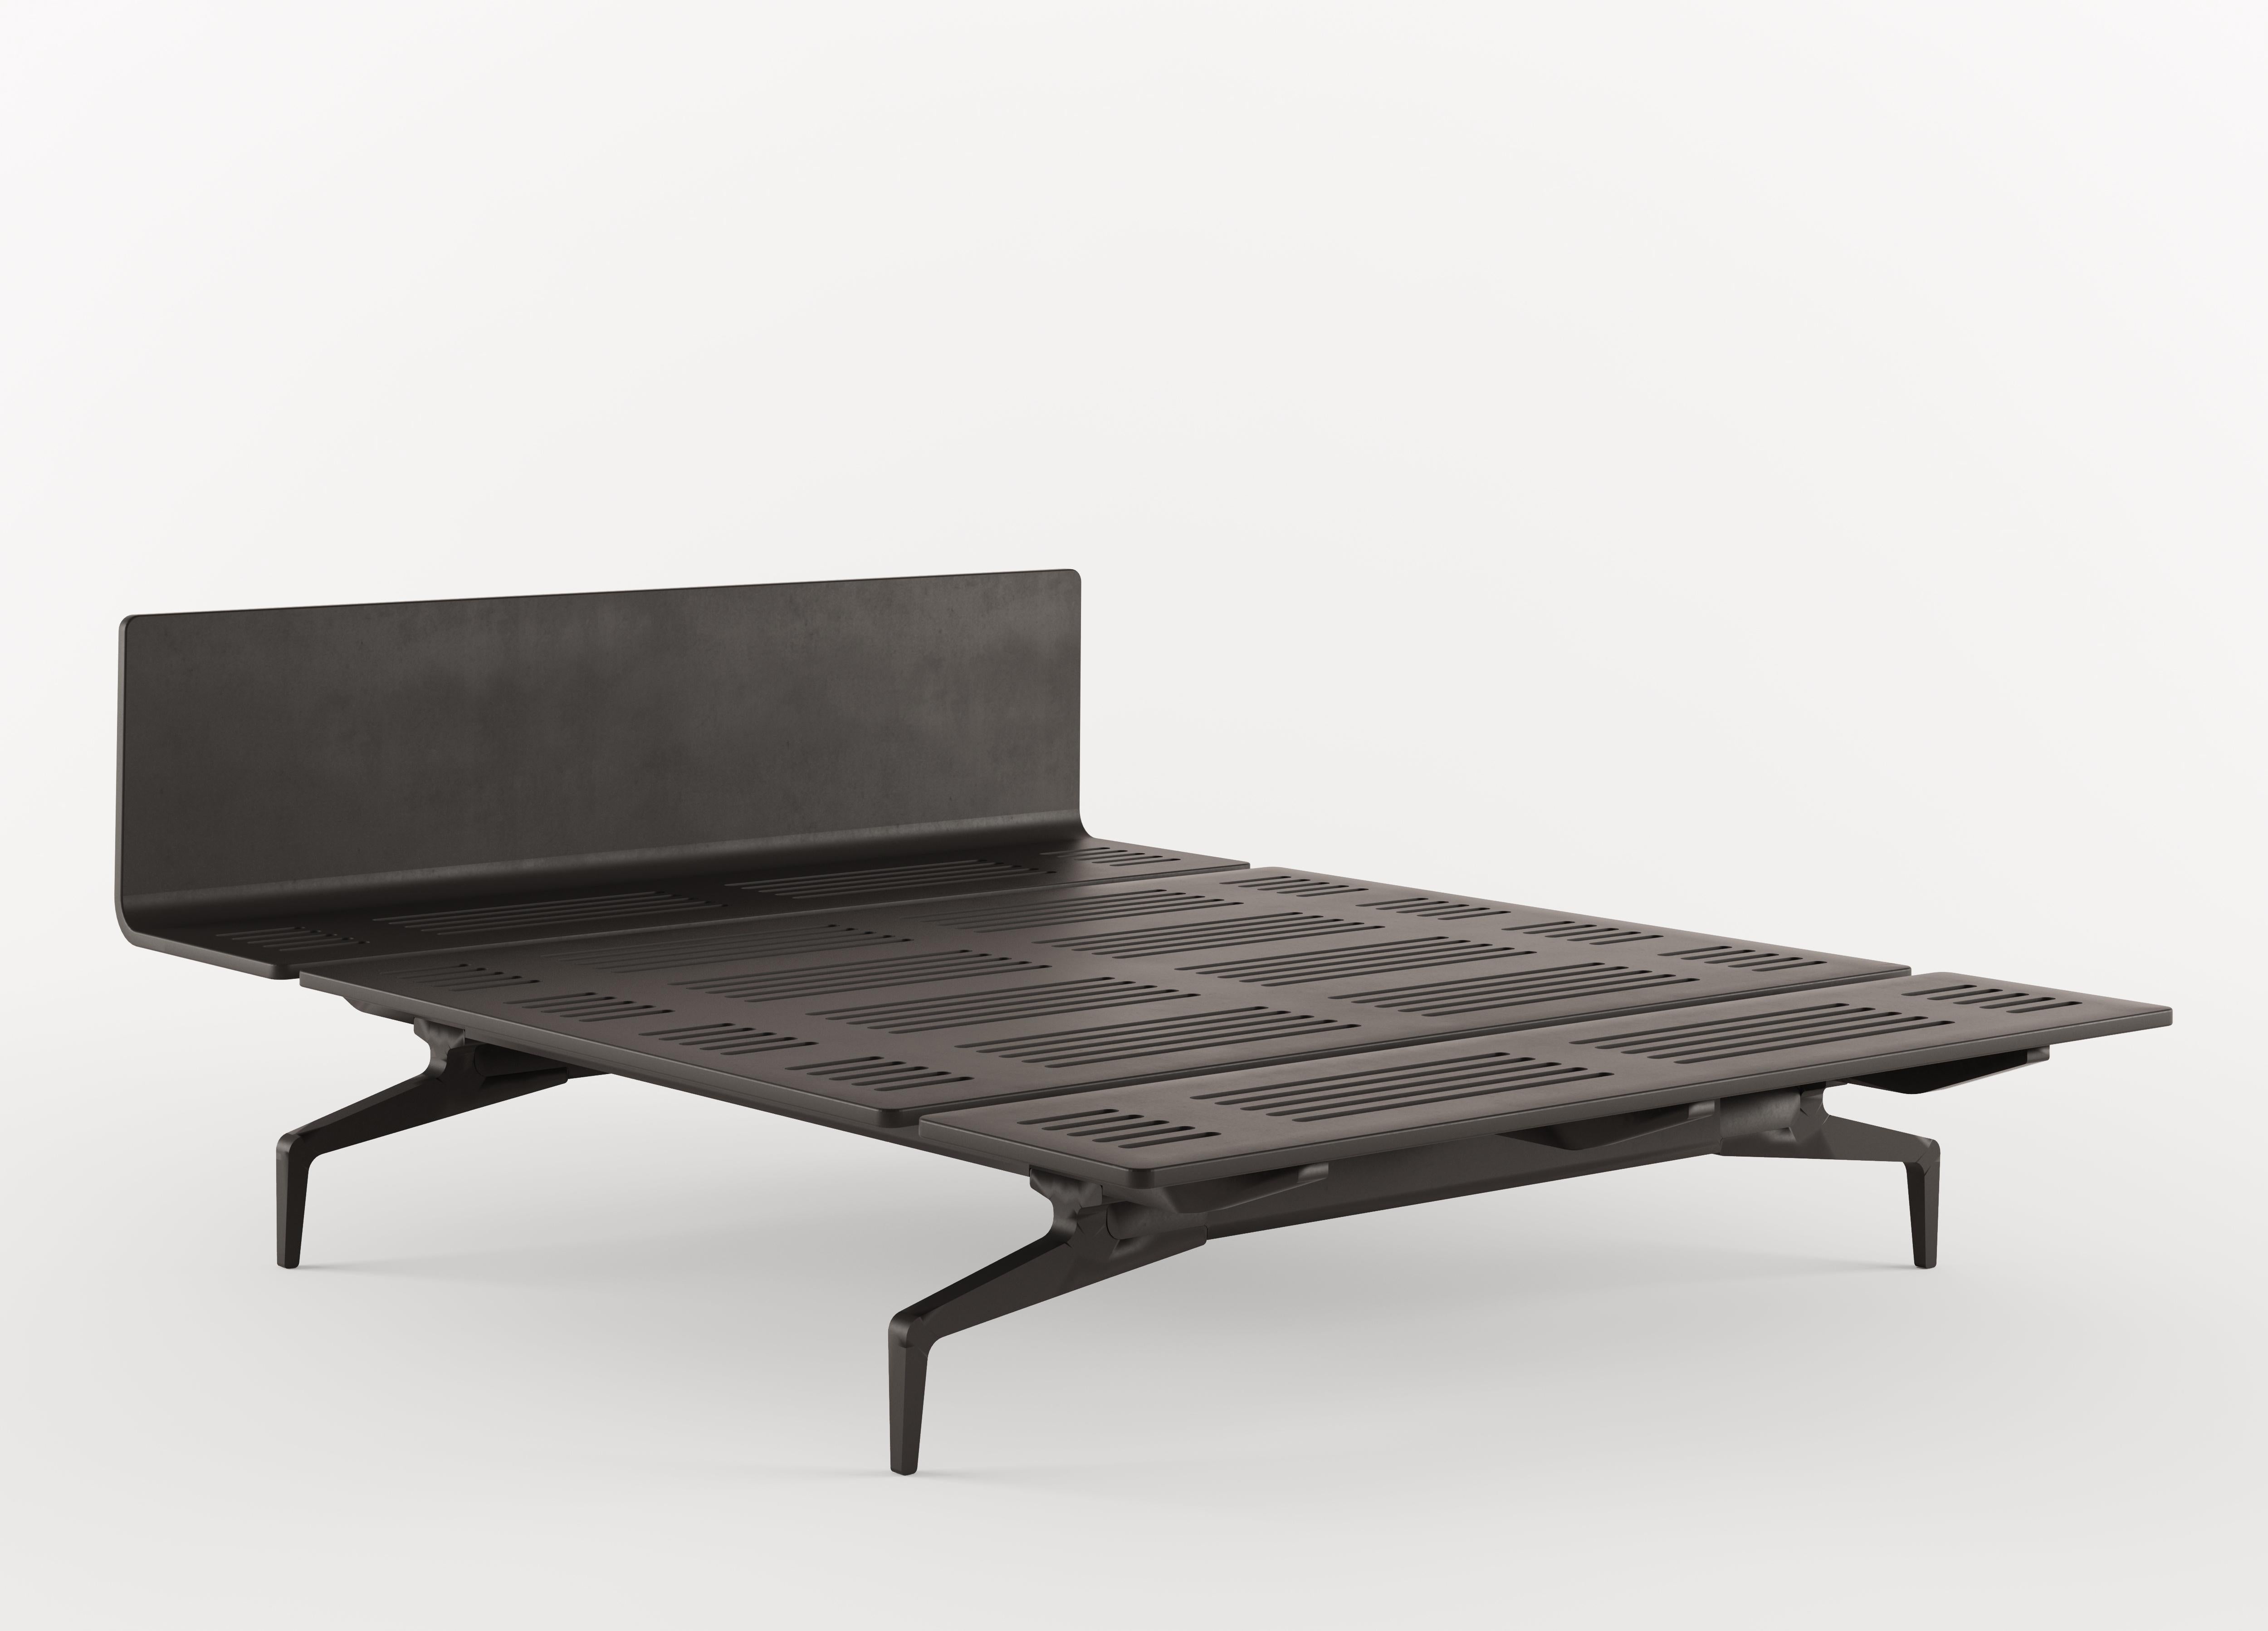 Alias Large LL3 Legnoletto Bed in Black Matt Lacquer Frame by Alfredo Häberli

Bed with headboard with medium edge and foot without edge matt lacquered; legs in polished or lacquered die-cast aluminium. Dimensions: - 90x206 cm (suggested mattress